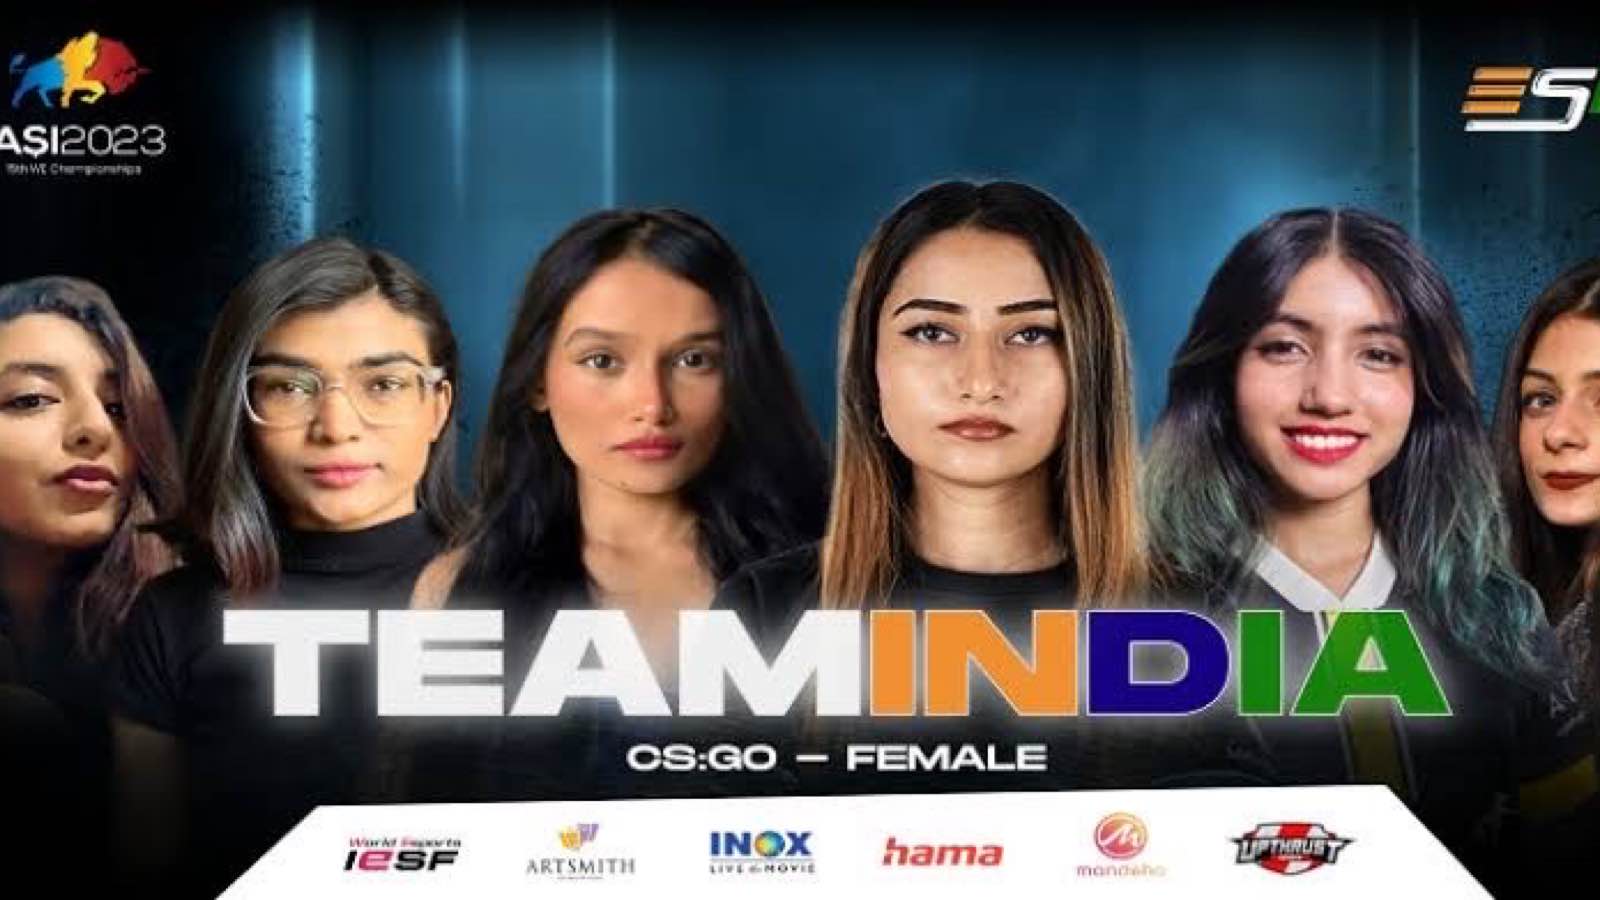 Top-G makes history by winning India’s first all-female CS:GO qualifiers for World Esports Championships